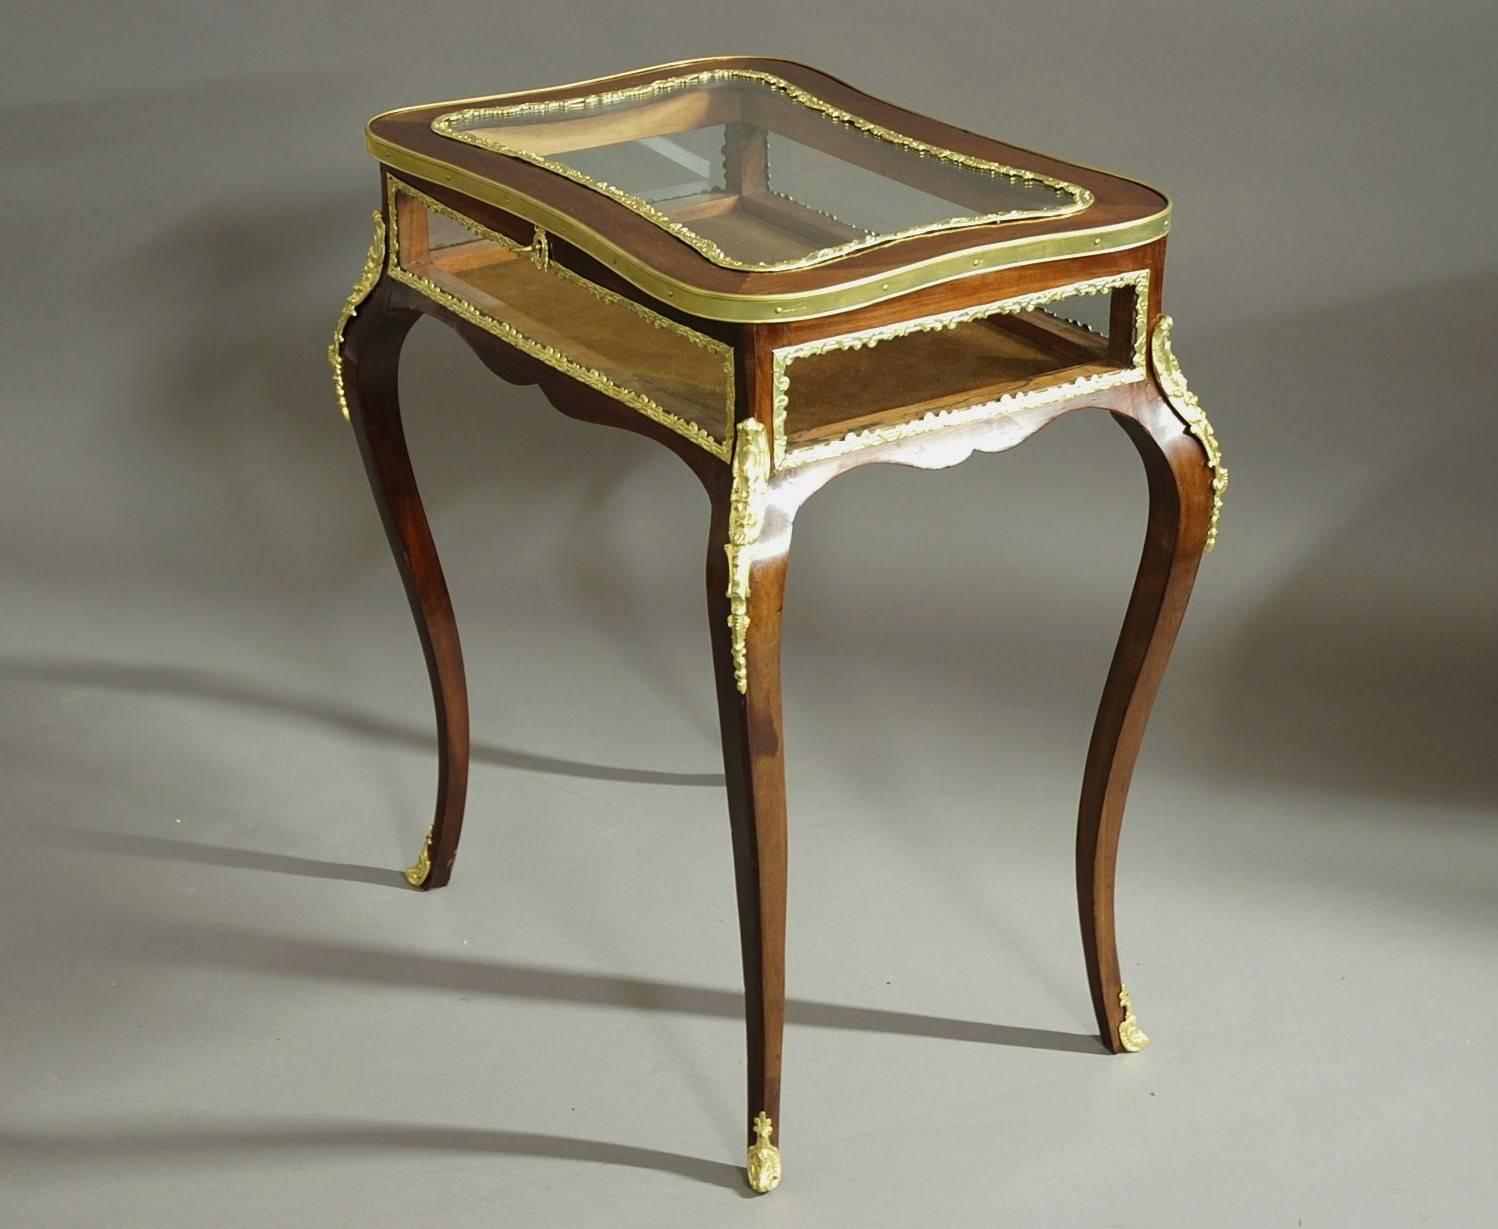 A French, late 19th century, mahogany freestanding bijouterie table of small proportions with key. 

This highly decorative table consists of a shaped top, the glass with a decorative ormolu moulding surrounding it with a reeded ormolu moulding